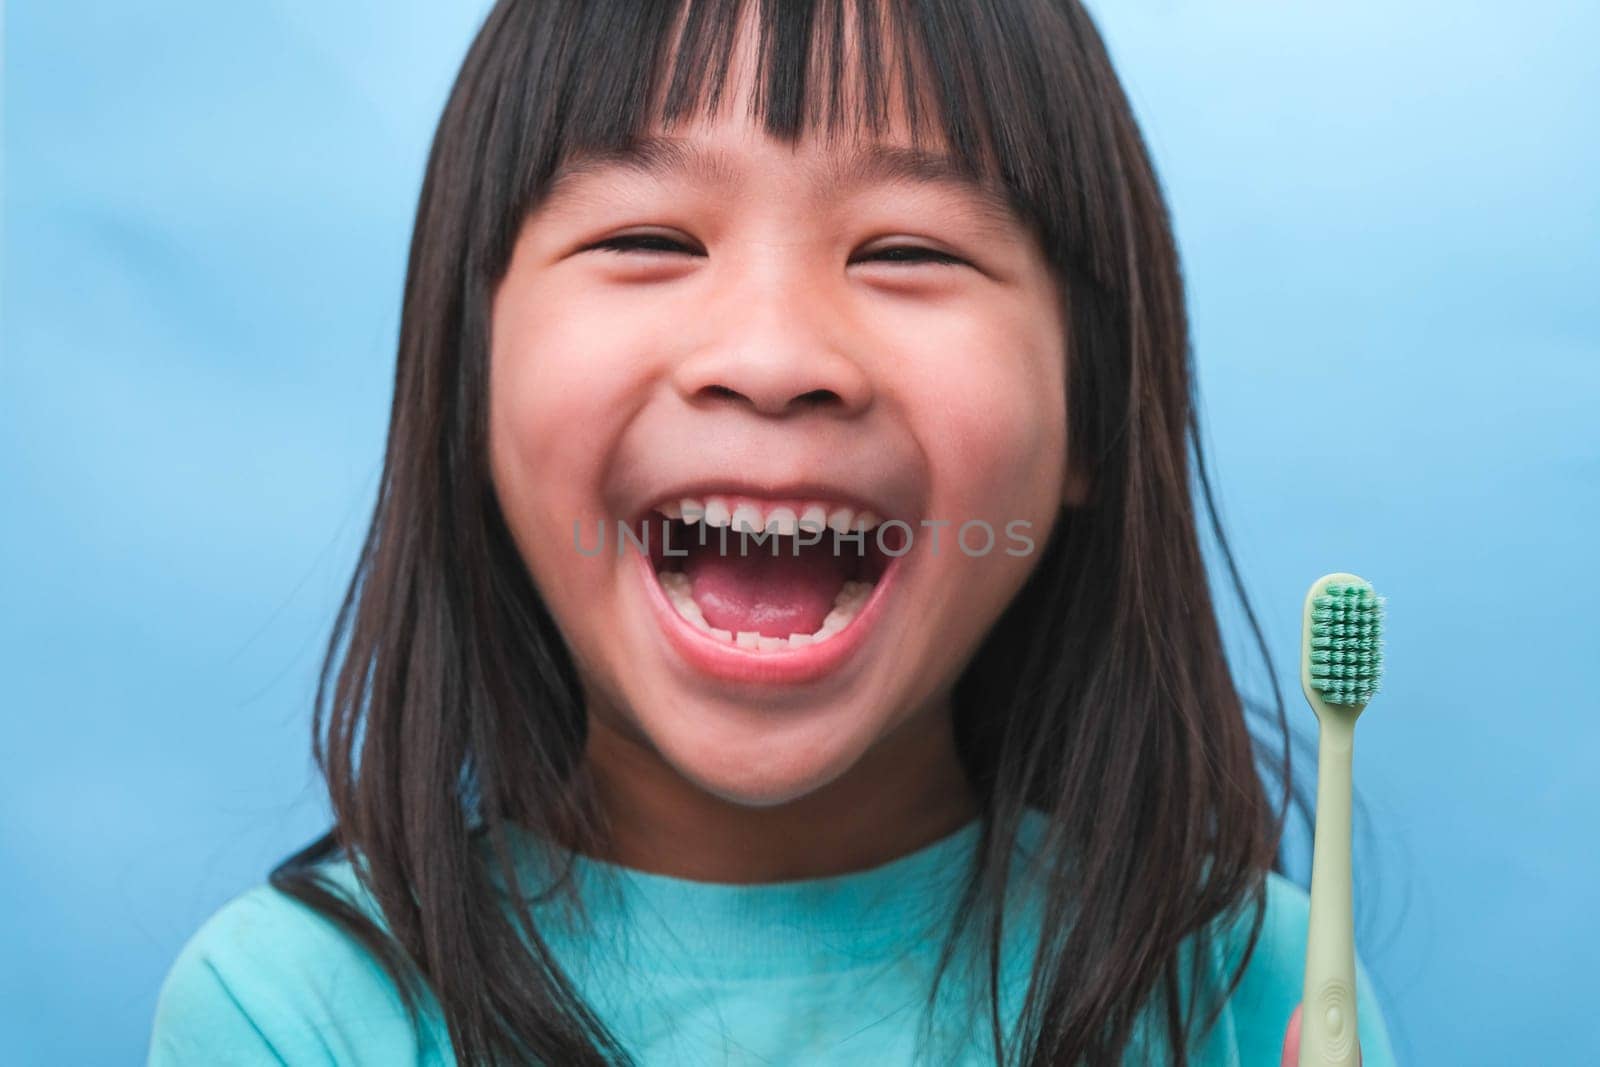 Smiling cute little girl holding toothbrush isolated on blue background. Cute little child brushing teeth. Kid training oral hygiene, Tooth decay prevention or dental care concept.